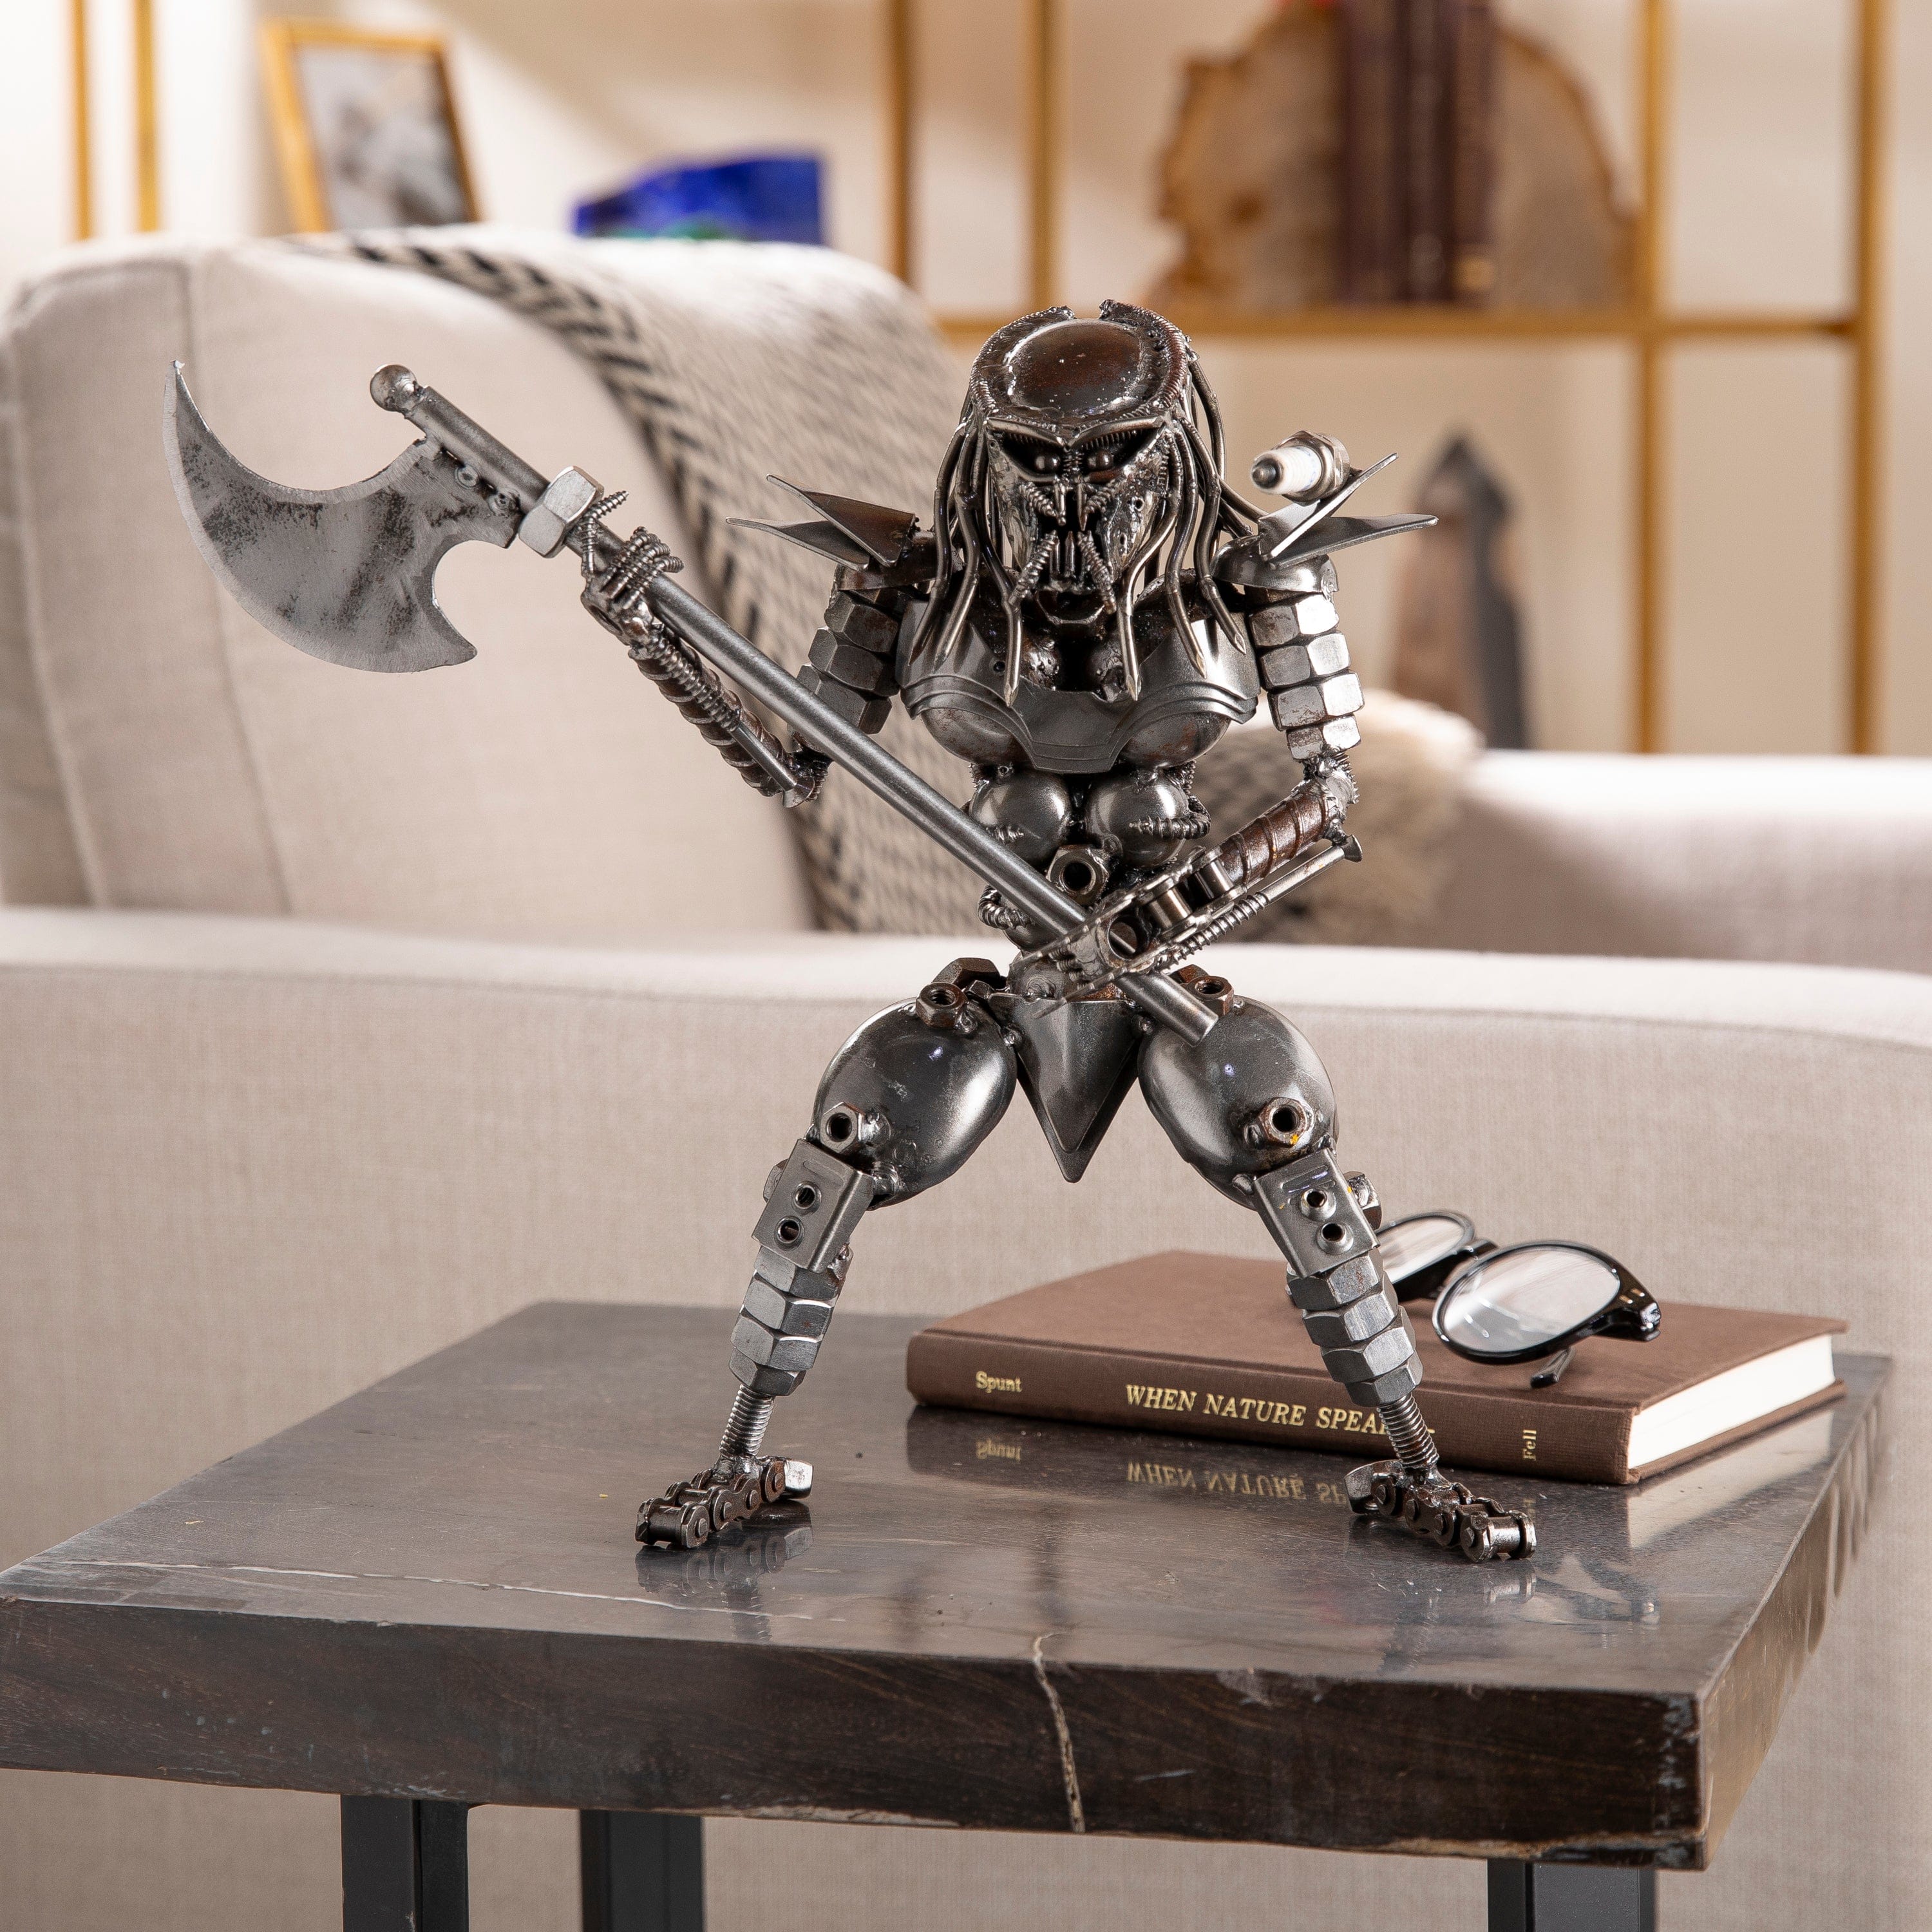 KALIFANO Recycled Metal Art Predator with Battle Axe Inspired Recycled Metal Sculpture RMS-700PB-N